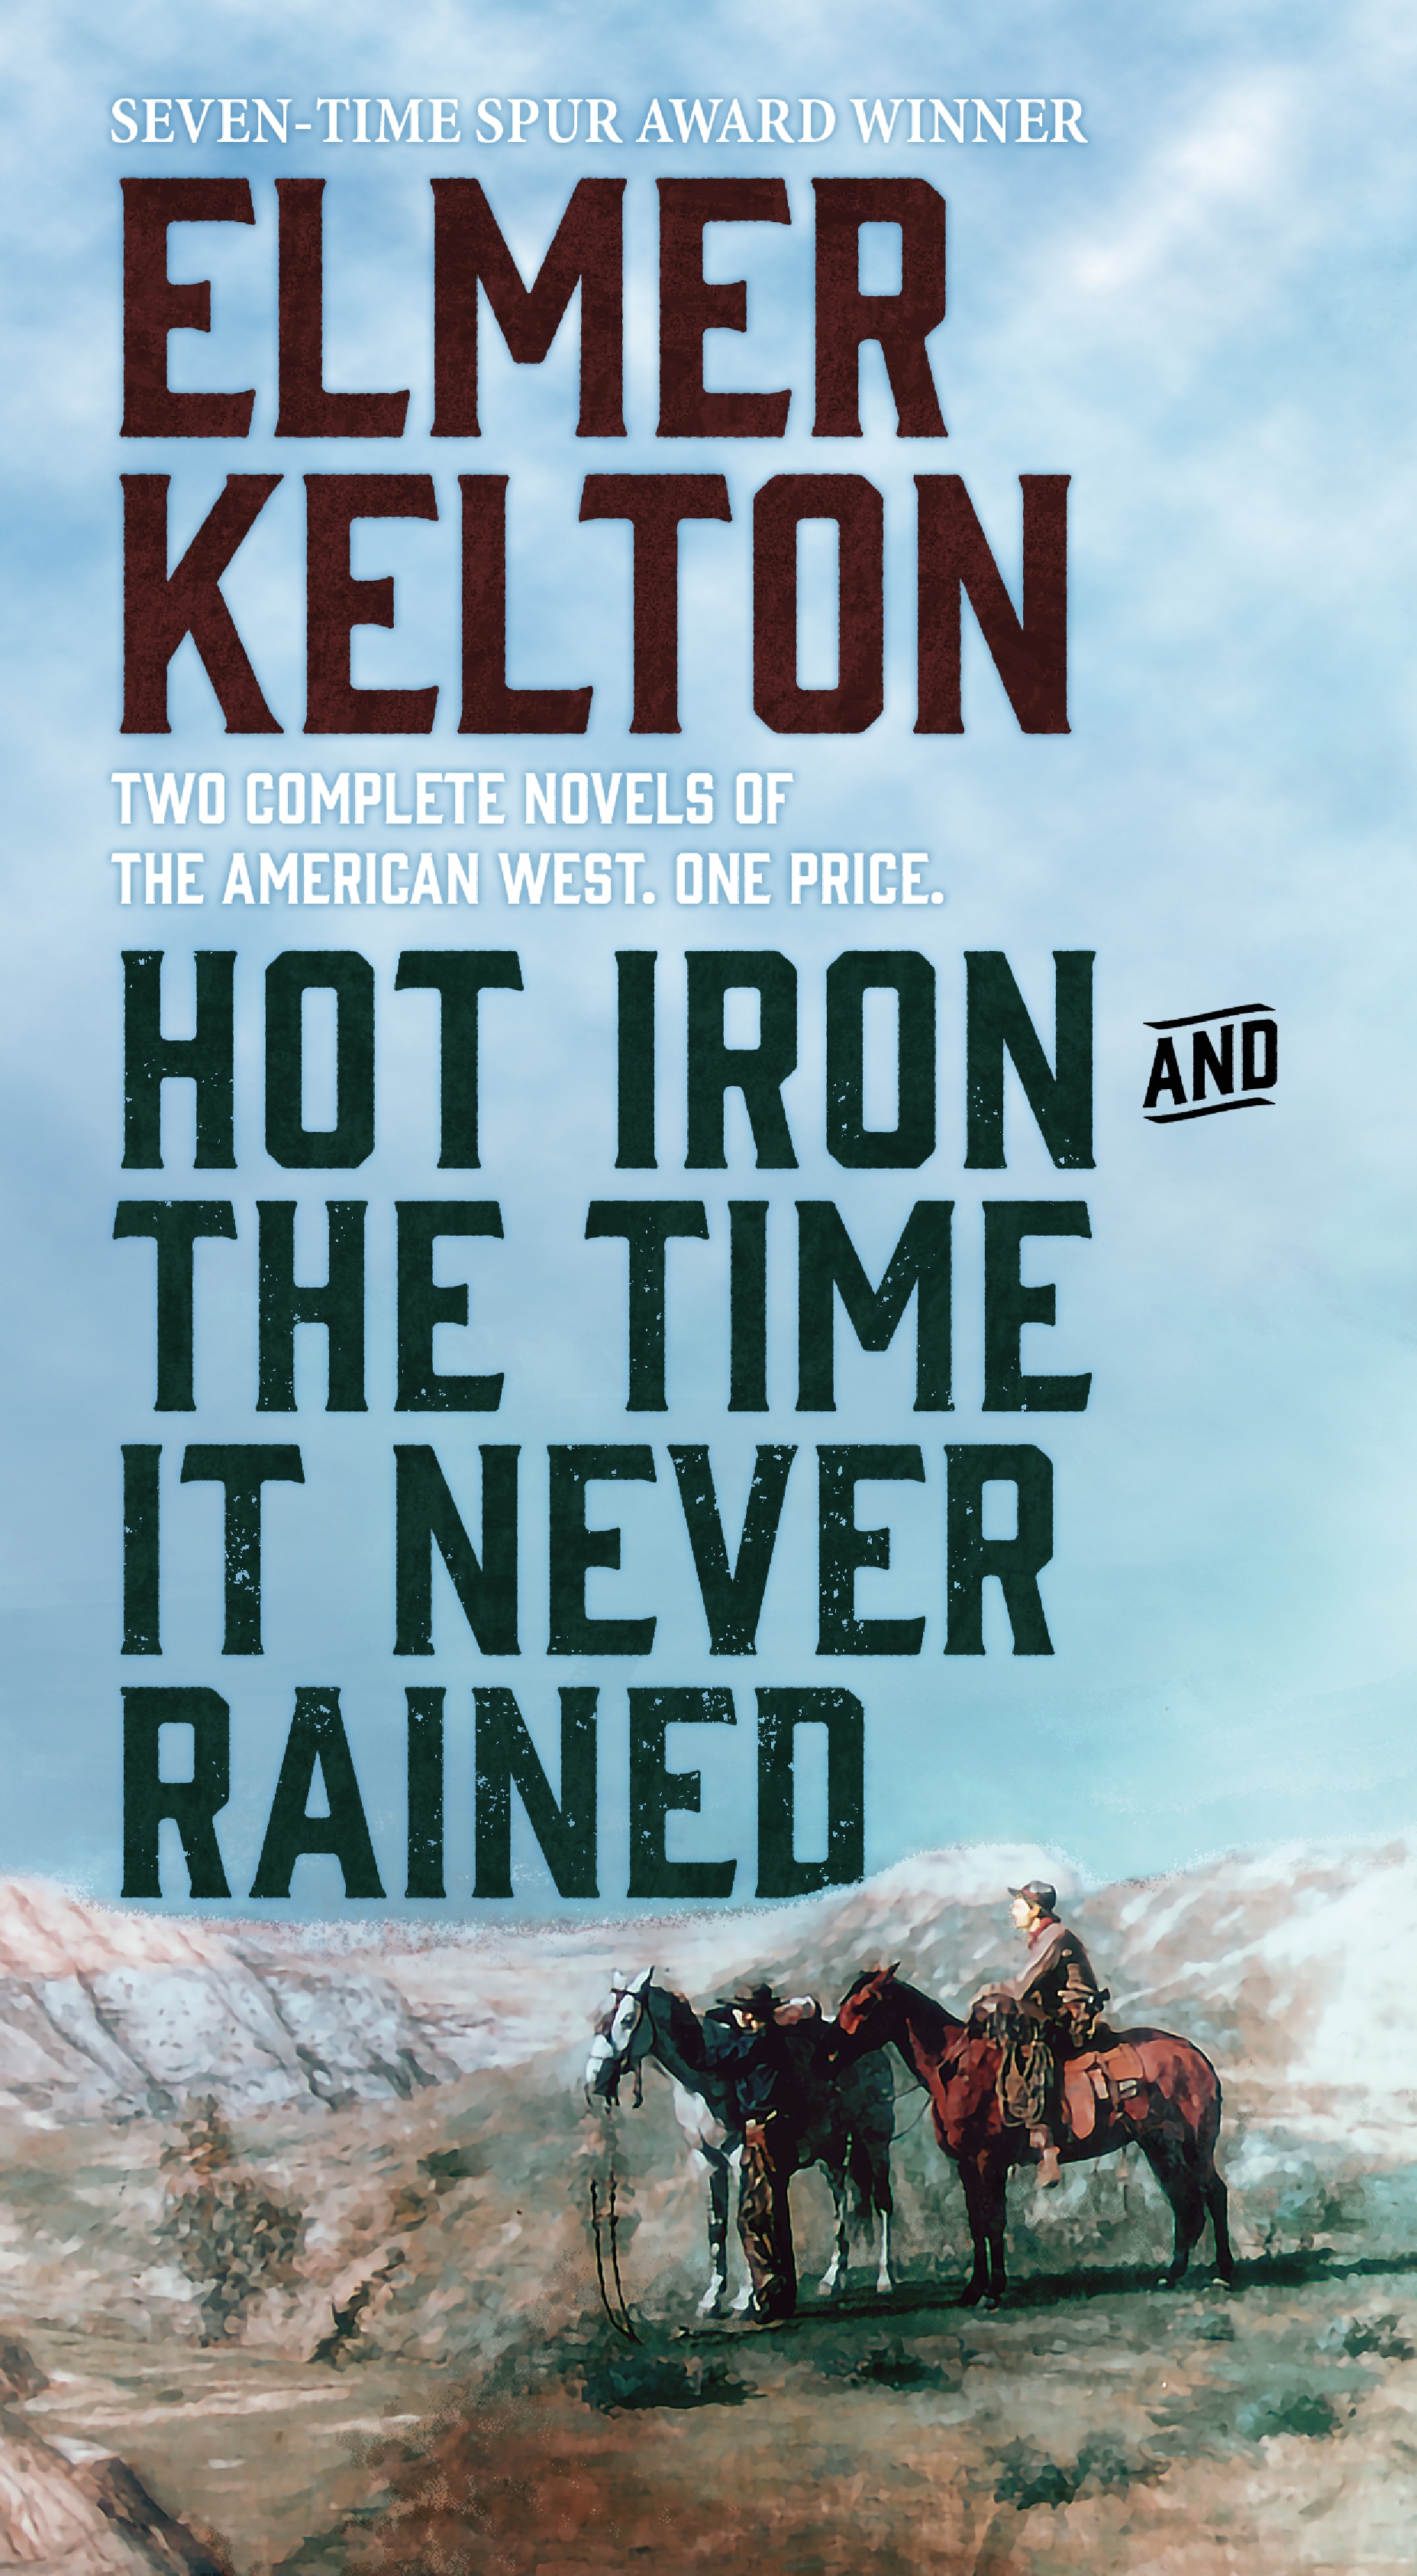 Hot Iron and The Time It Never Rained by Elmer Kelton